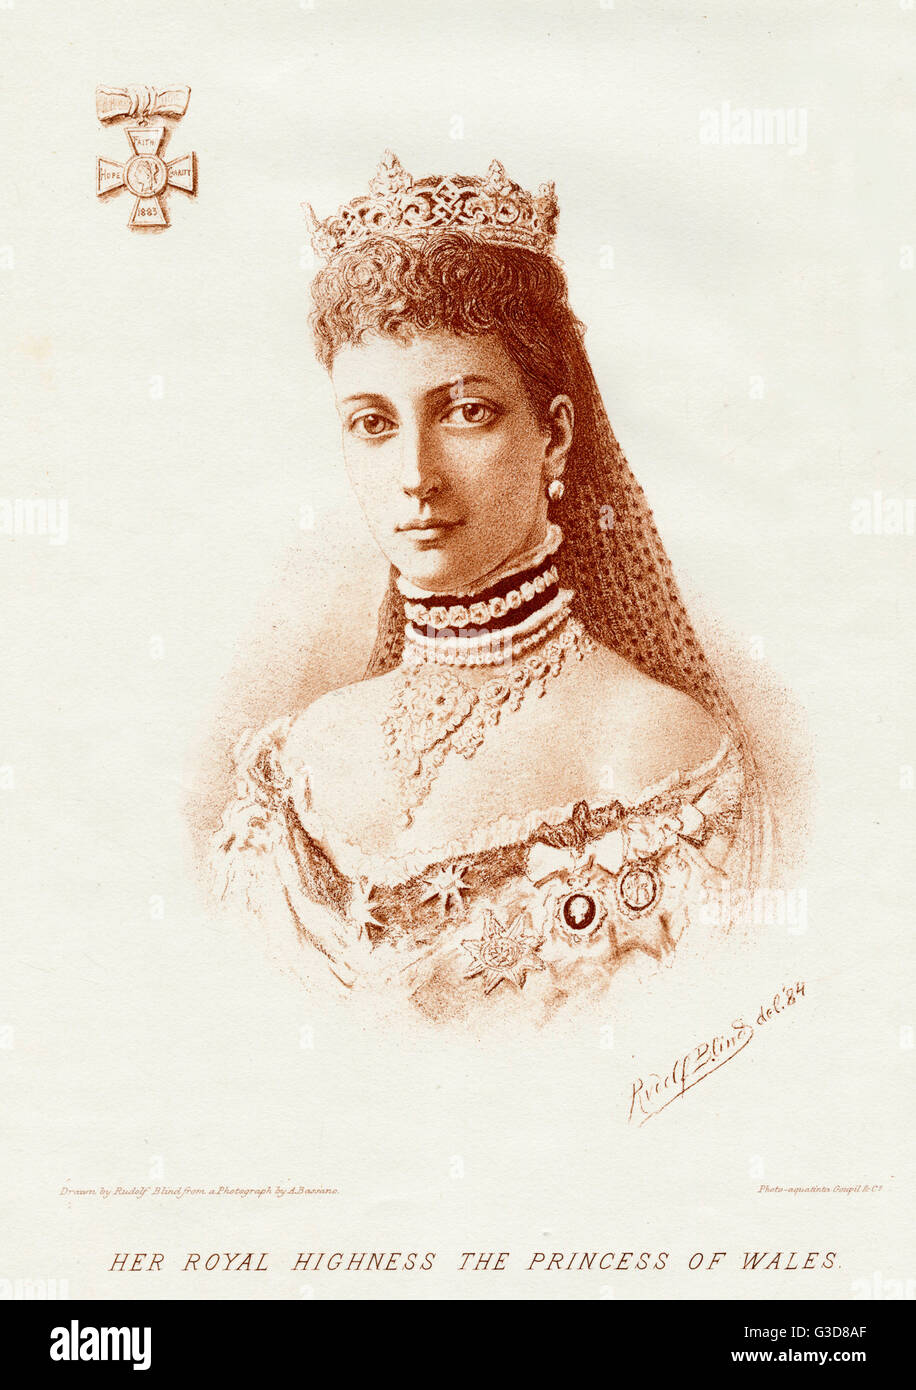 Her Royal Highness The Princess of Wales (future Queen Alexandra consort to Edward VII of Britain).      Date: 1883 Stock Photo